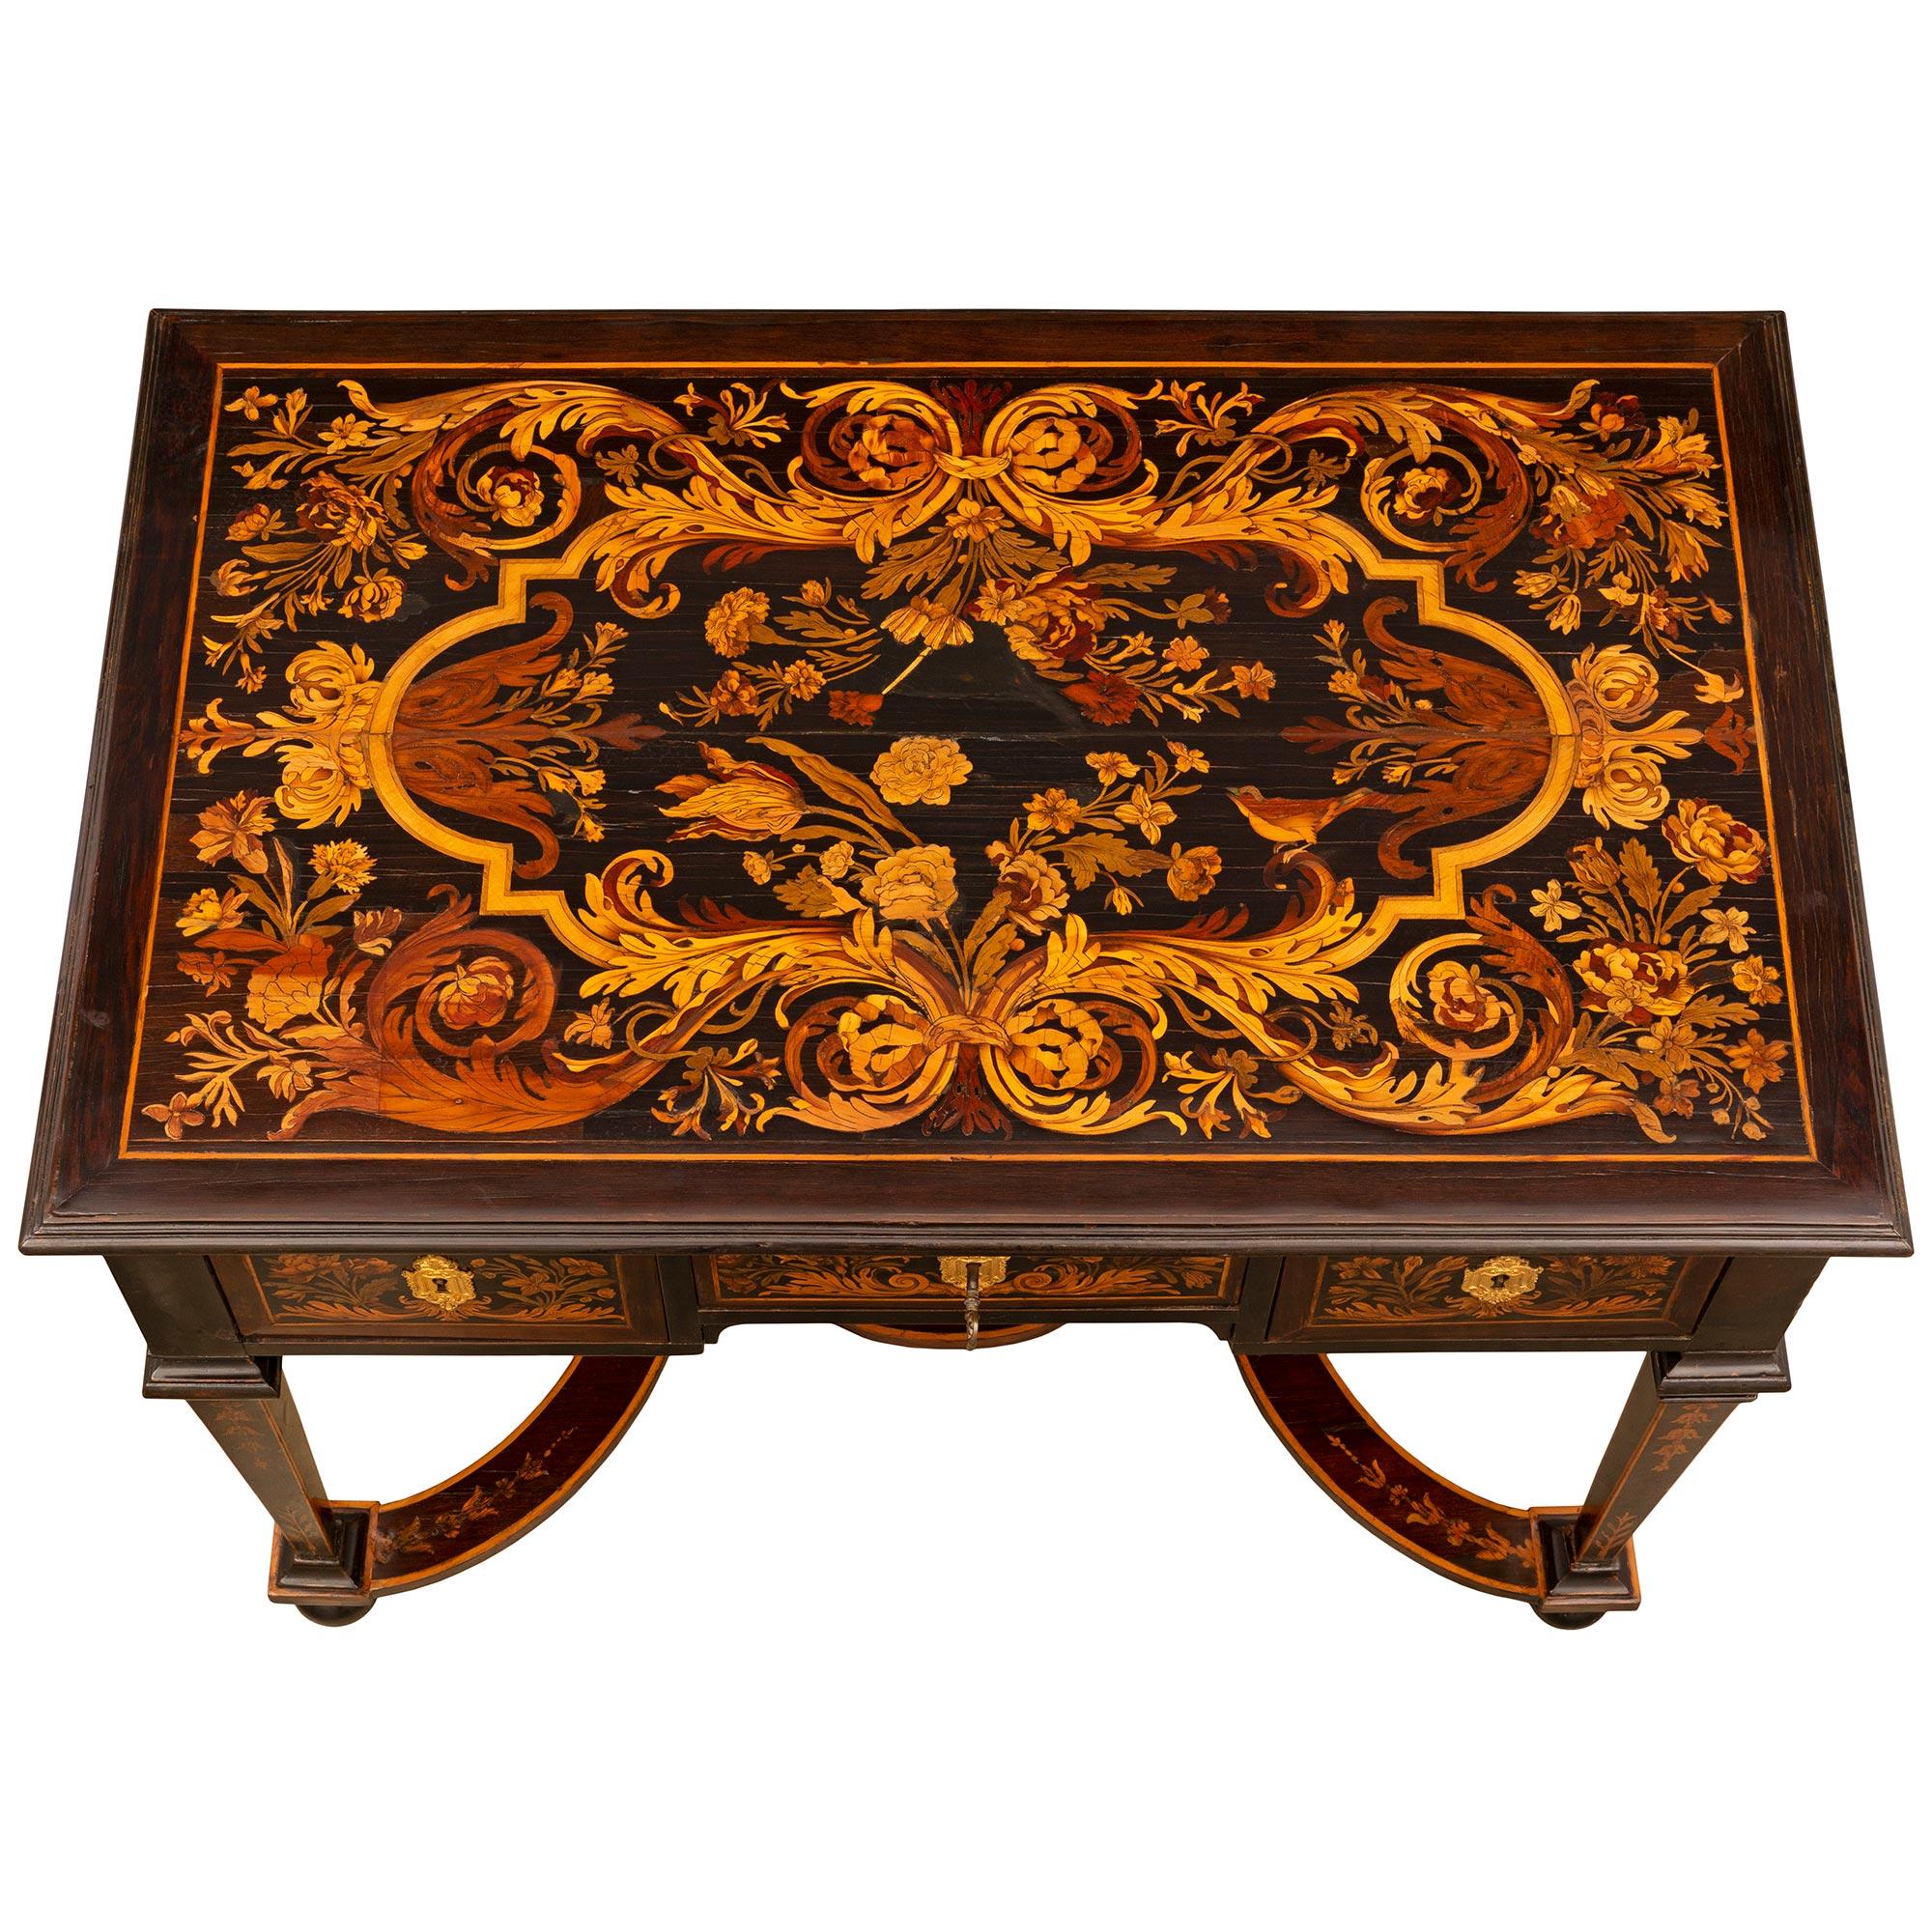 An exceptional Italian early 19th century ebonized fruitwood, exotic wood, and ormolu desk. The three drawer desk is raised by elegant square tapered legs with bun feet and finely inlaid foliate designs. Each leg is connected by a charming stretcher